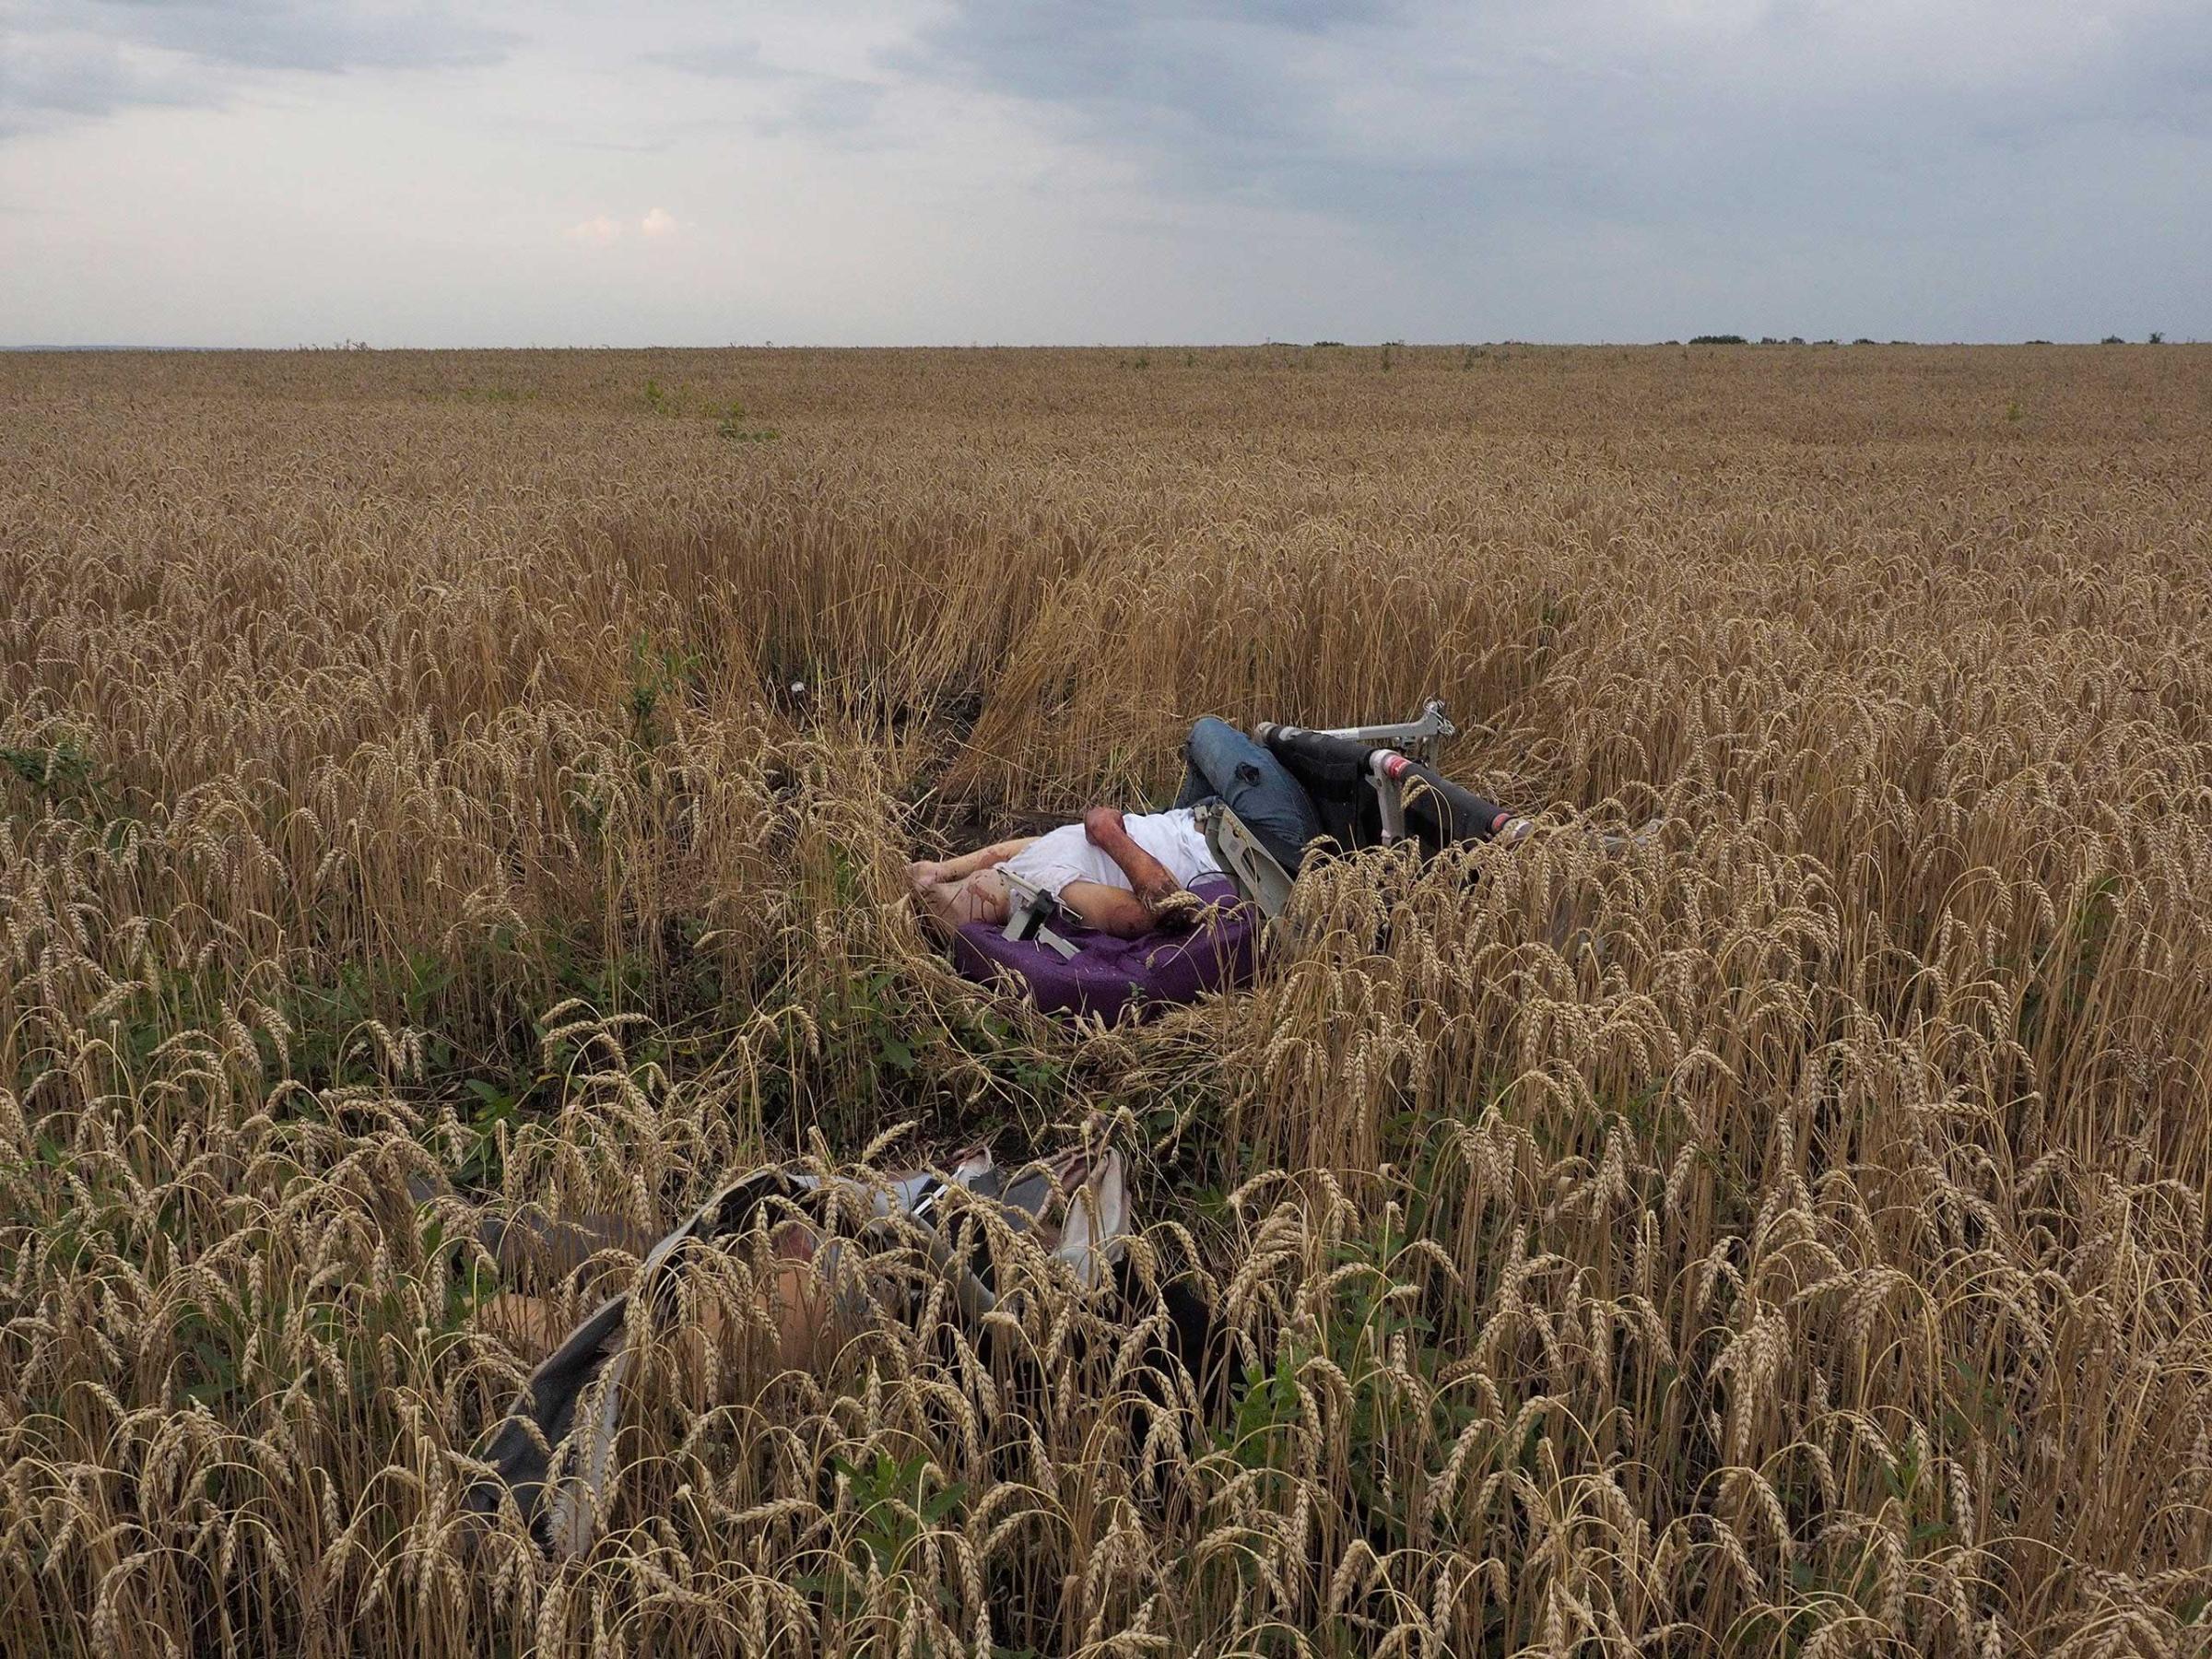 The body of a passenger from Malaysian Airlines flight MH17 which was shot down over Ukraine, July 17, 2014.